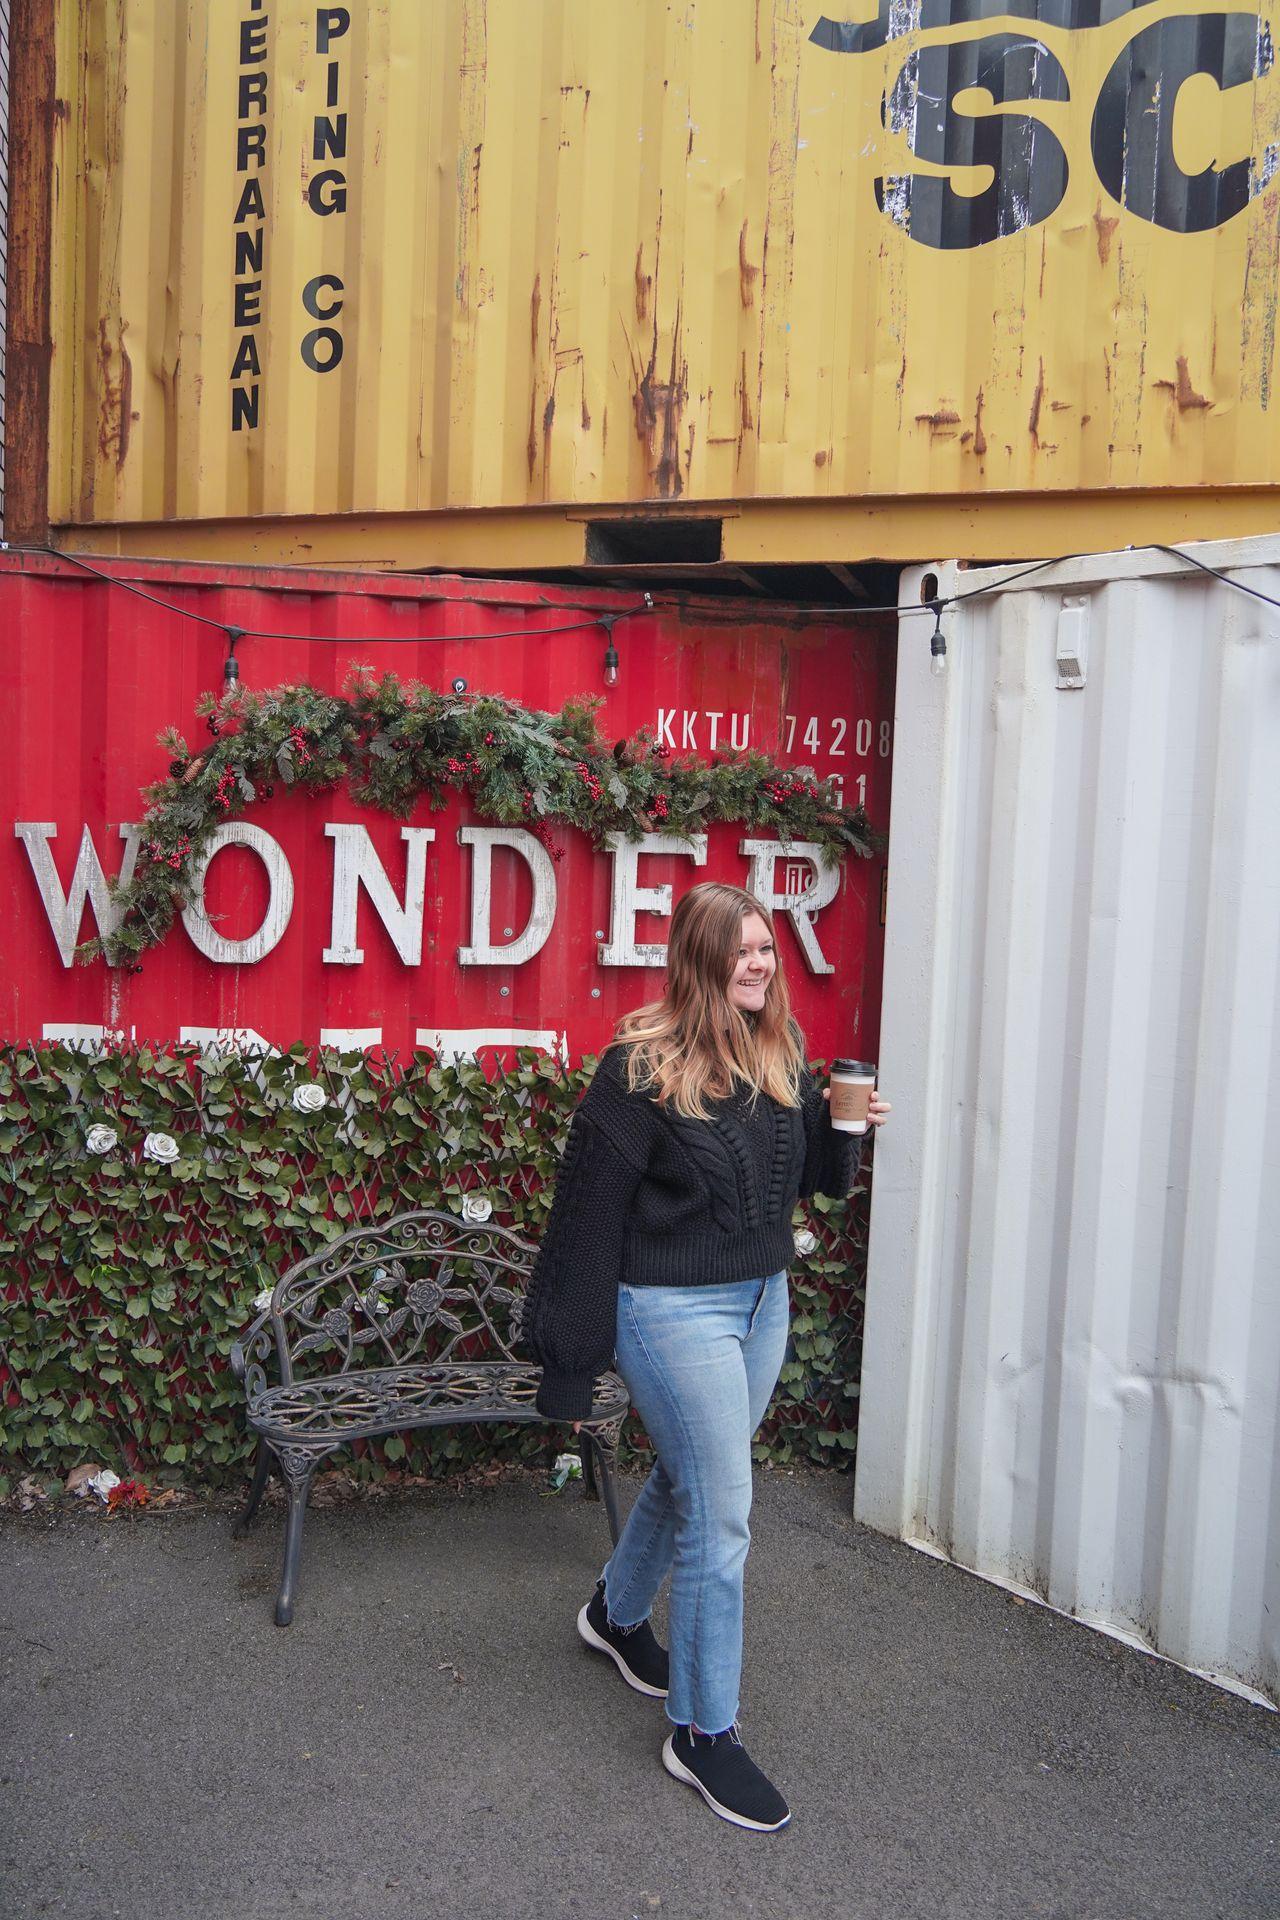 Lydia holding a coffee and standing in front of a display with 3 shipping containers, which are yellow, red and white. The red one reads 'Wonder' and is partially covered with greenery.